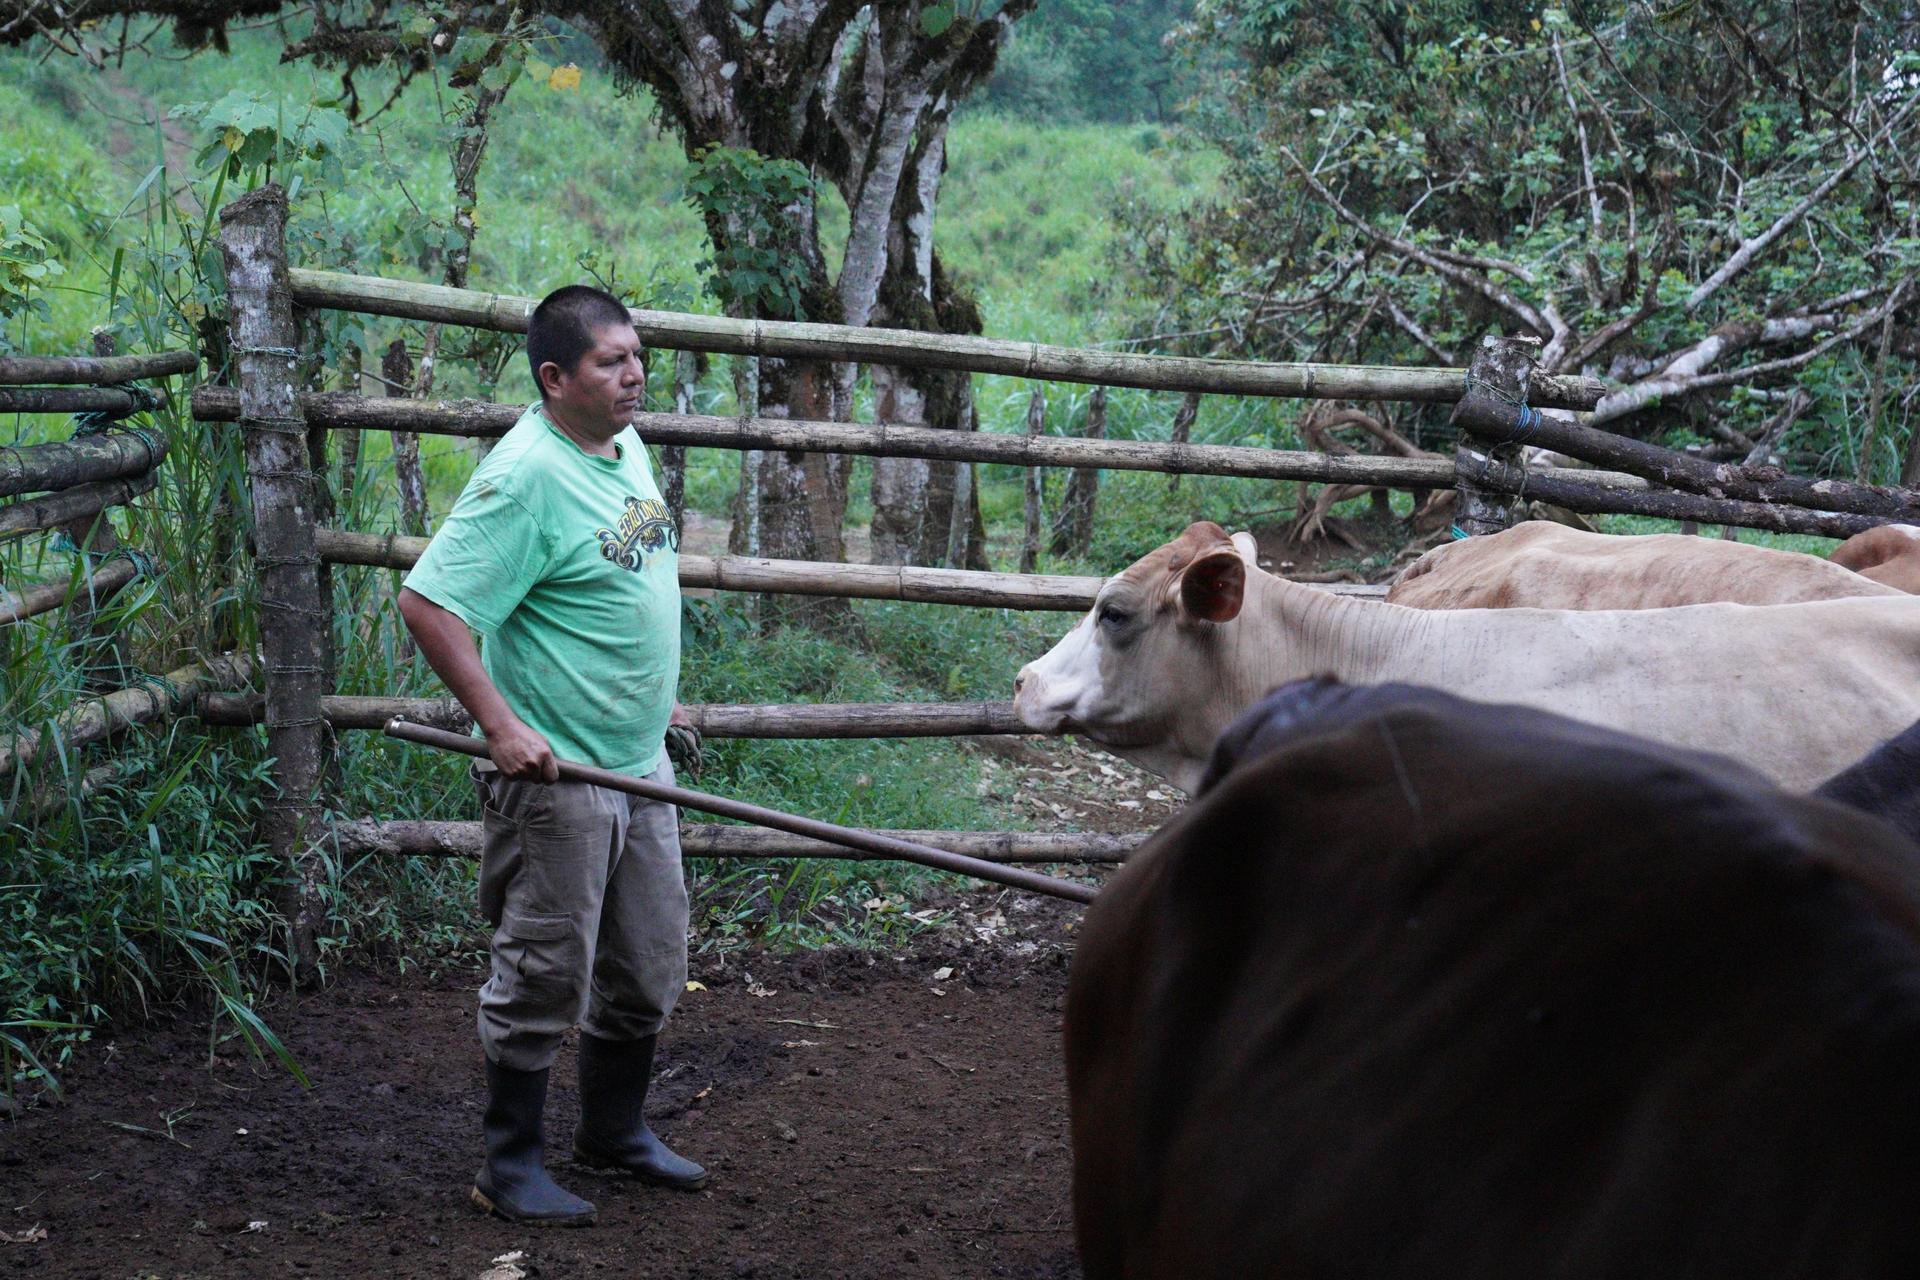 Javier Cando gets ready to milk his cows early in the morning on May 6, 2021. Due to the pandemic, Cando has had to switch from working as a guide on the Galápagos Islands to milking cows on his family's farm.